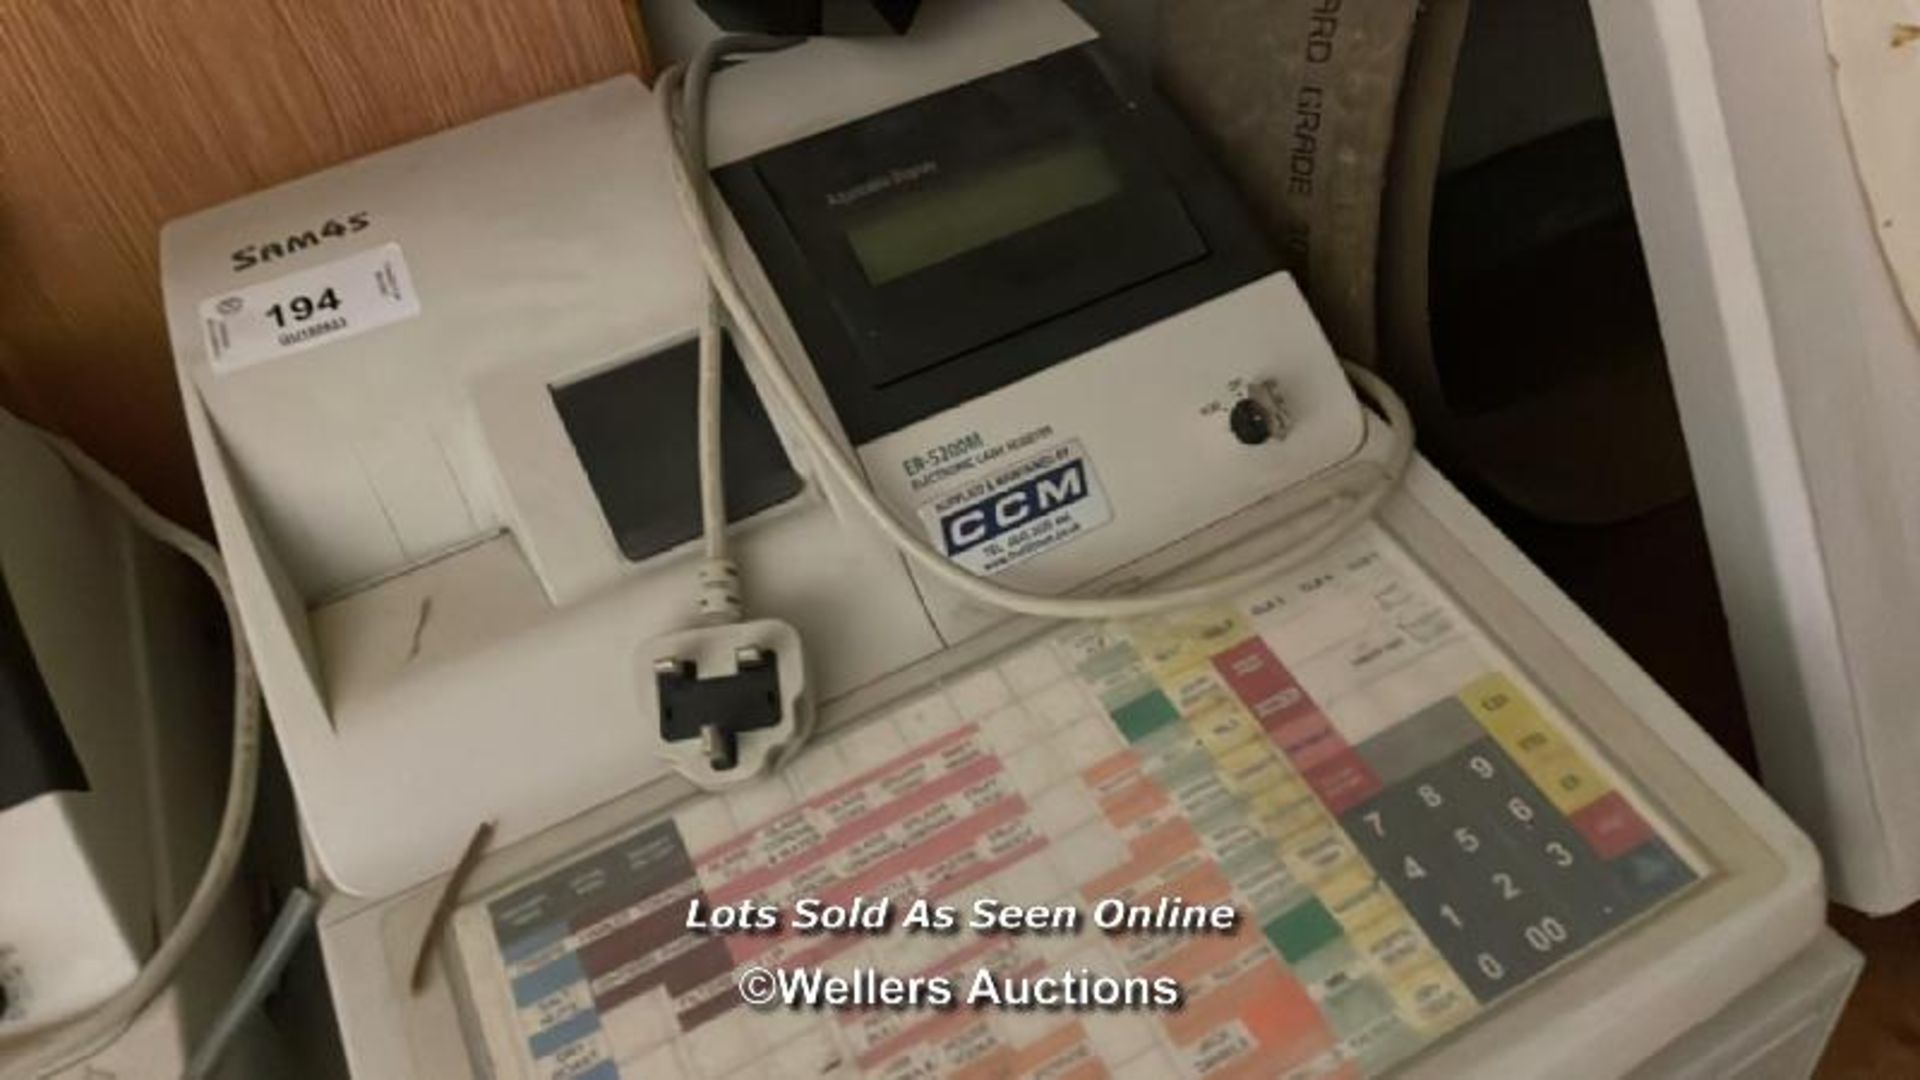 2X SAM4S ER-5200M ELECTRONIC CASH REGISTERS WITH KEYS / COLLECTION LOCATION: OLD WOKING DISTRICT - Image 2 of 3